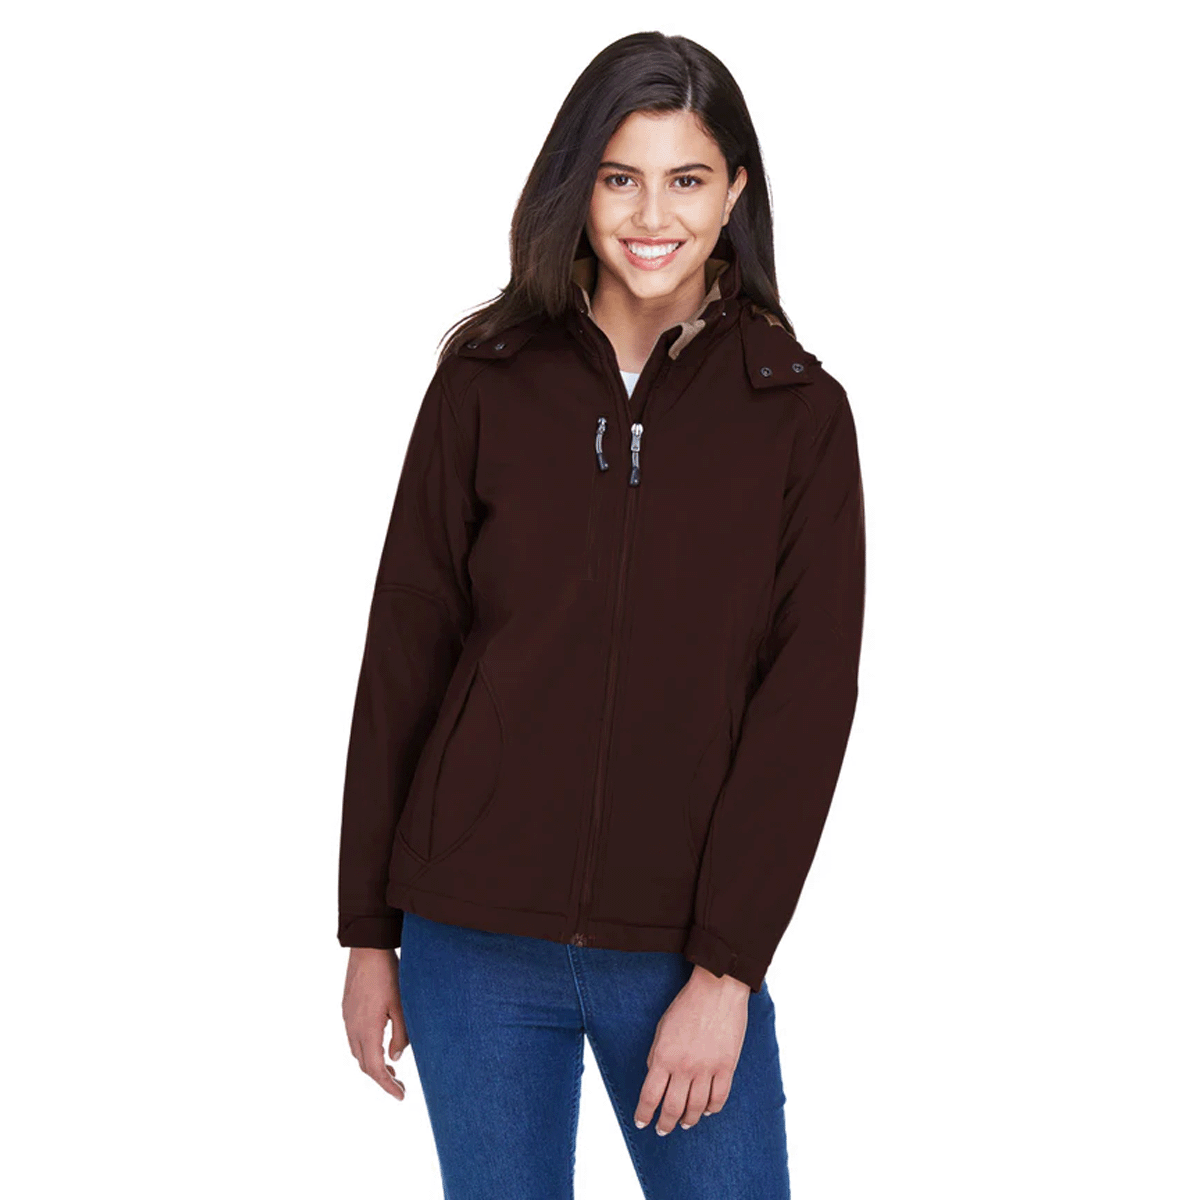 NORTH END LADIES GLACIER INSULATED 3-LAYER SOFTSHELL JACKET